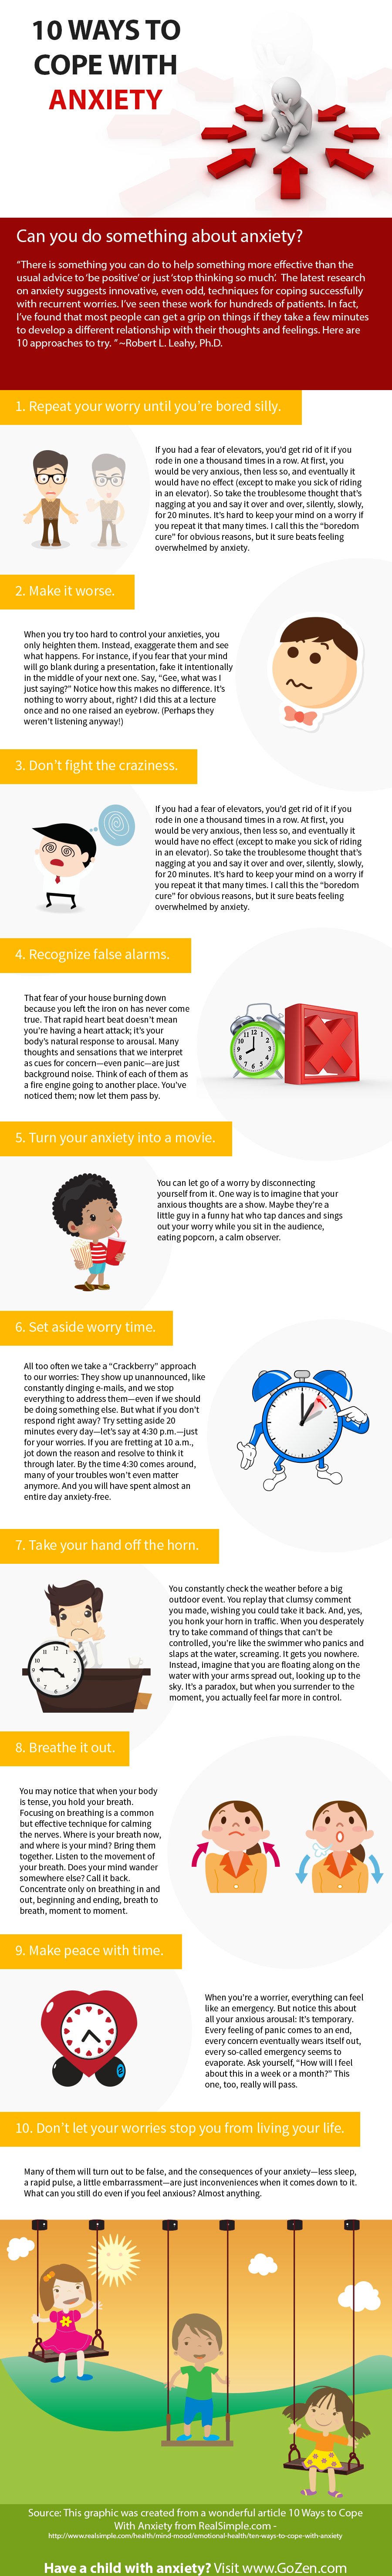 10 Ways to Fight Anxiety